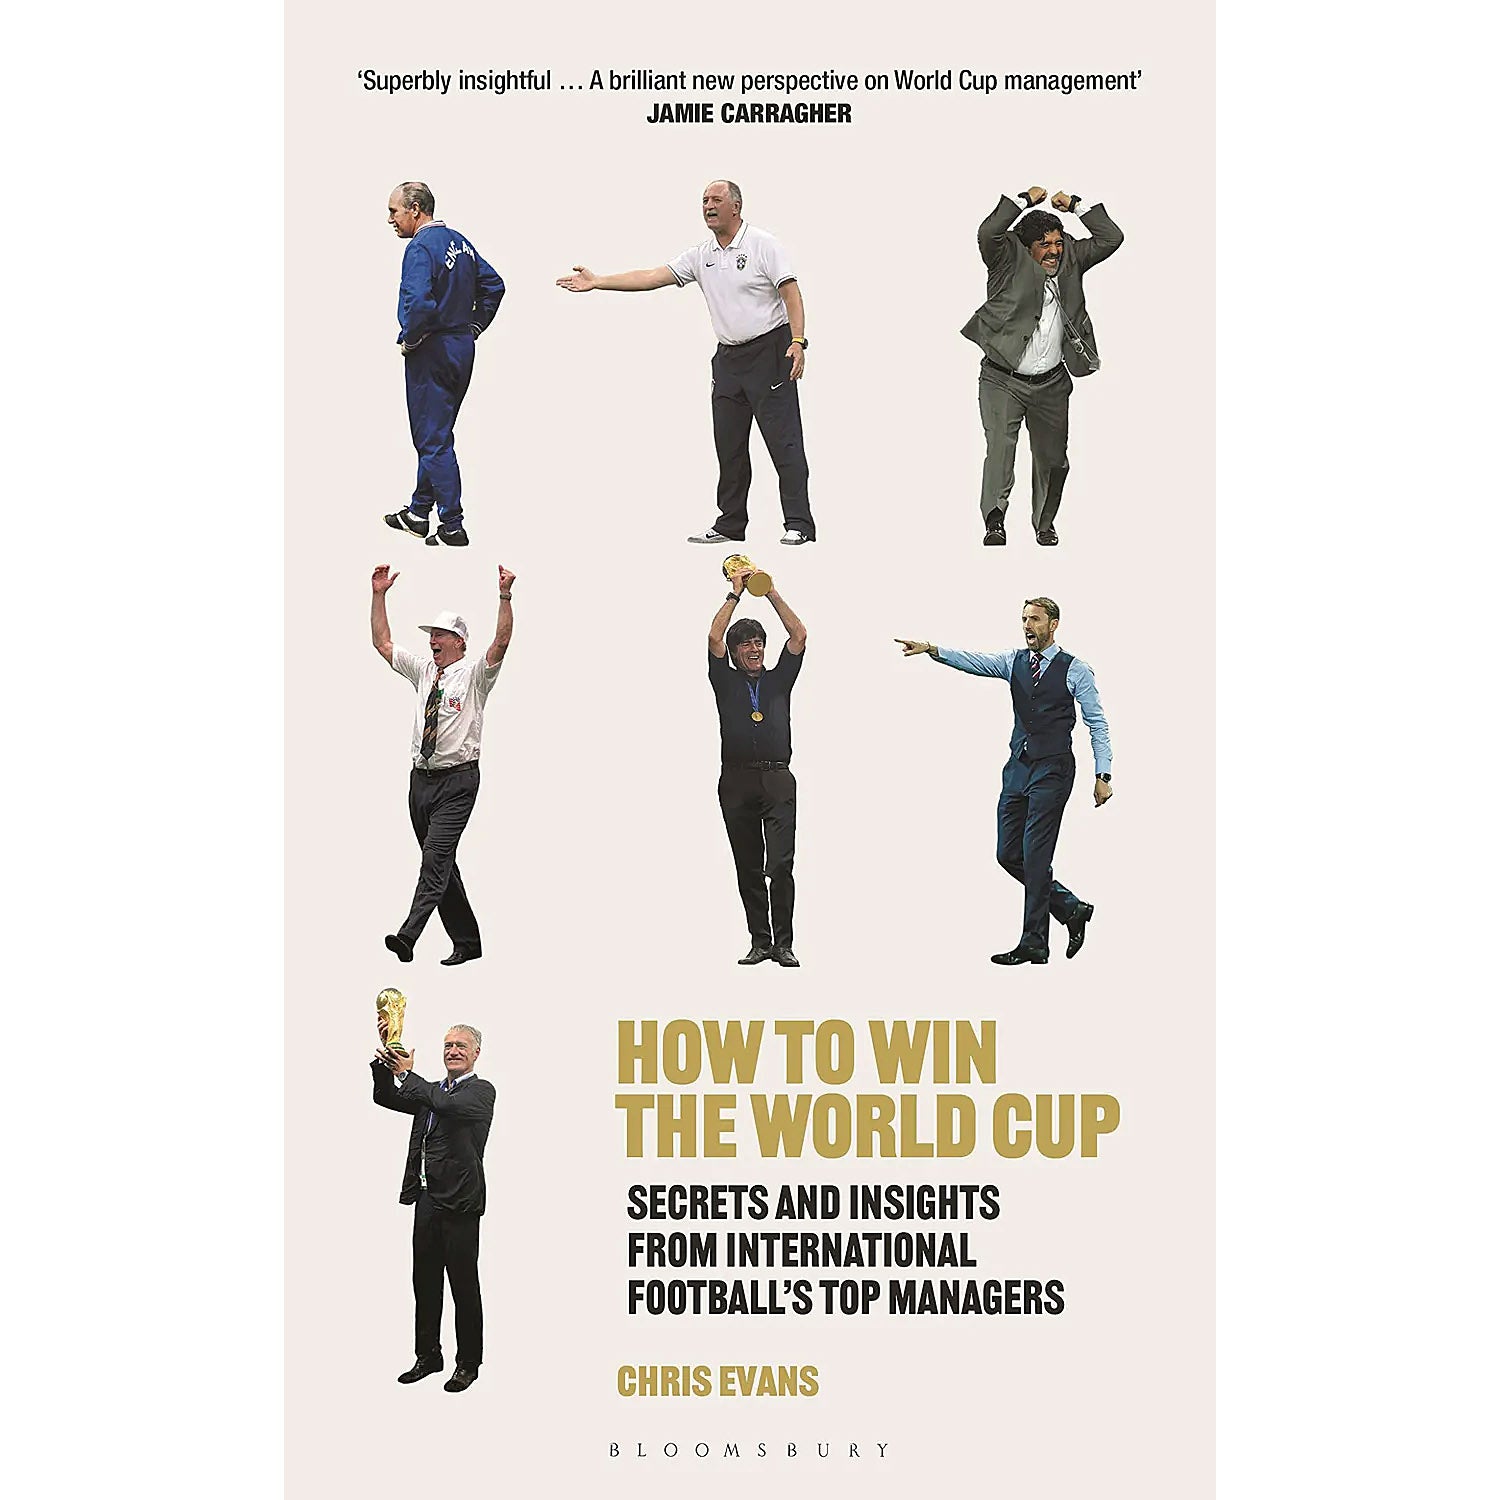 How to Win the World Cup – Secrets and Insights from International Football's Top Managers